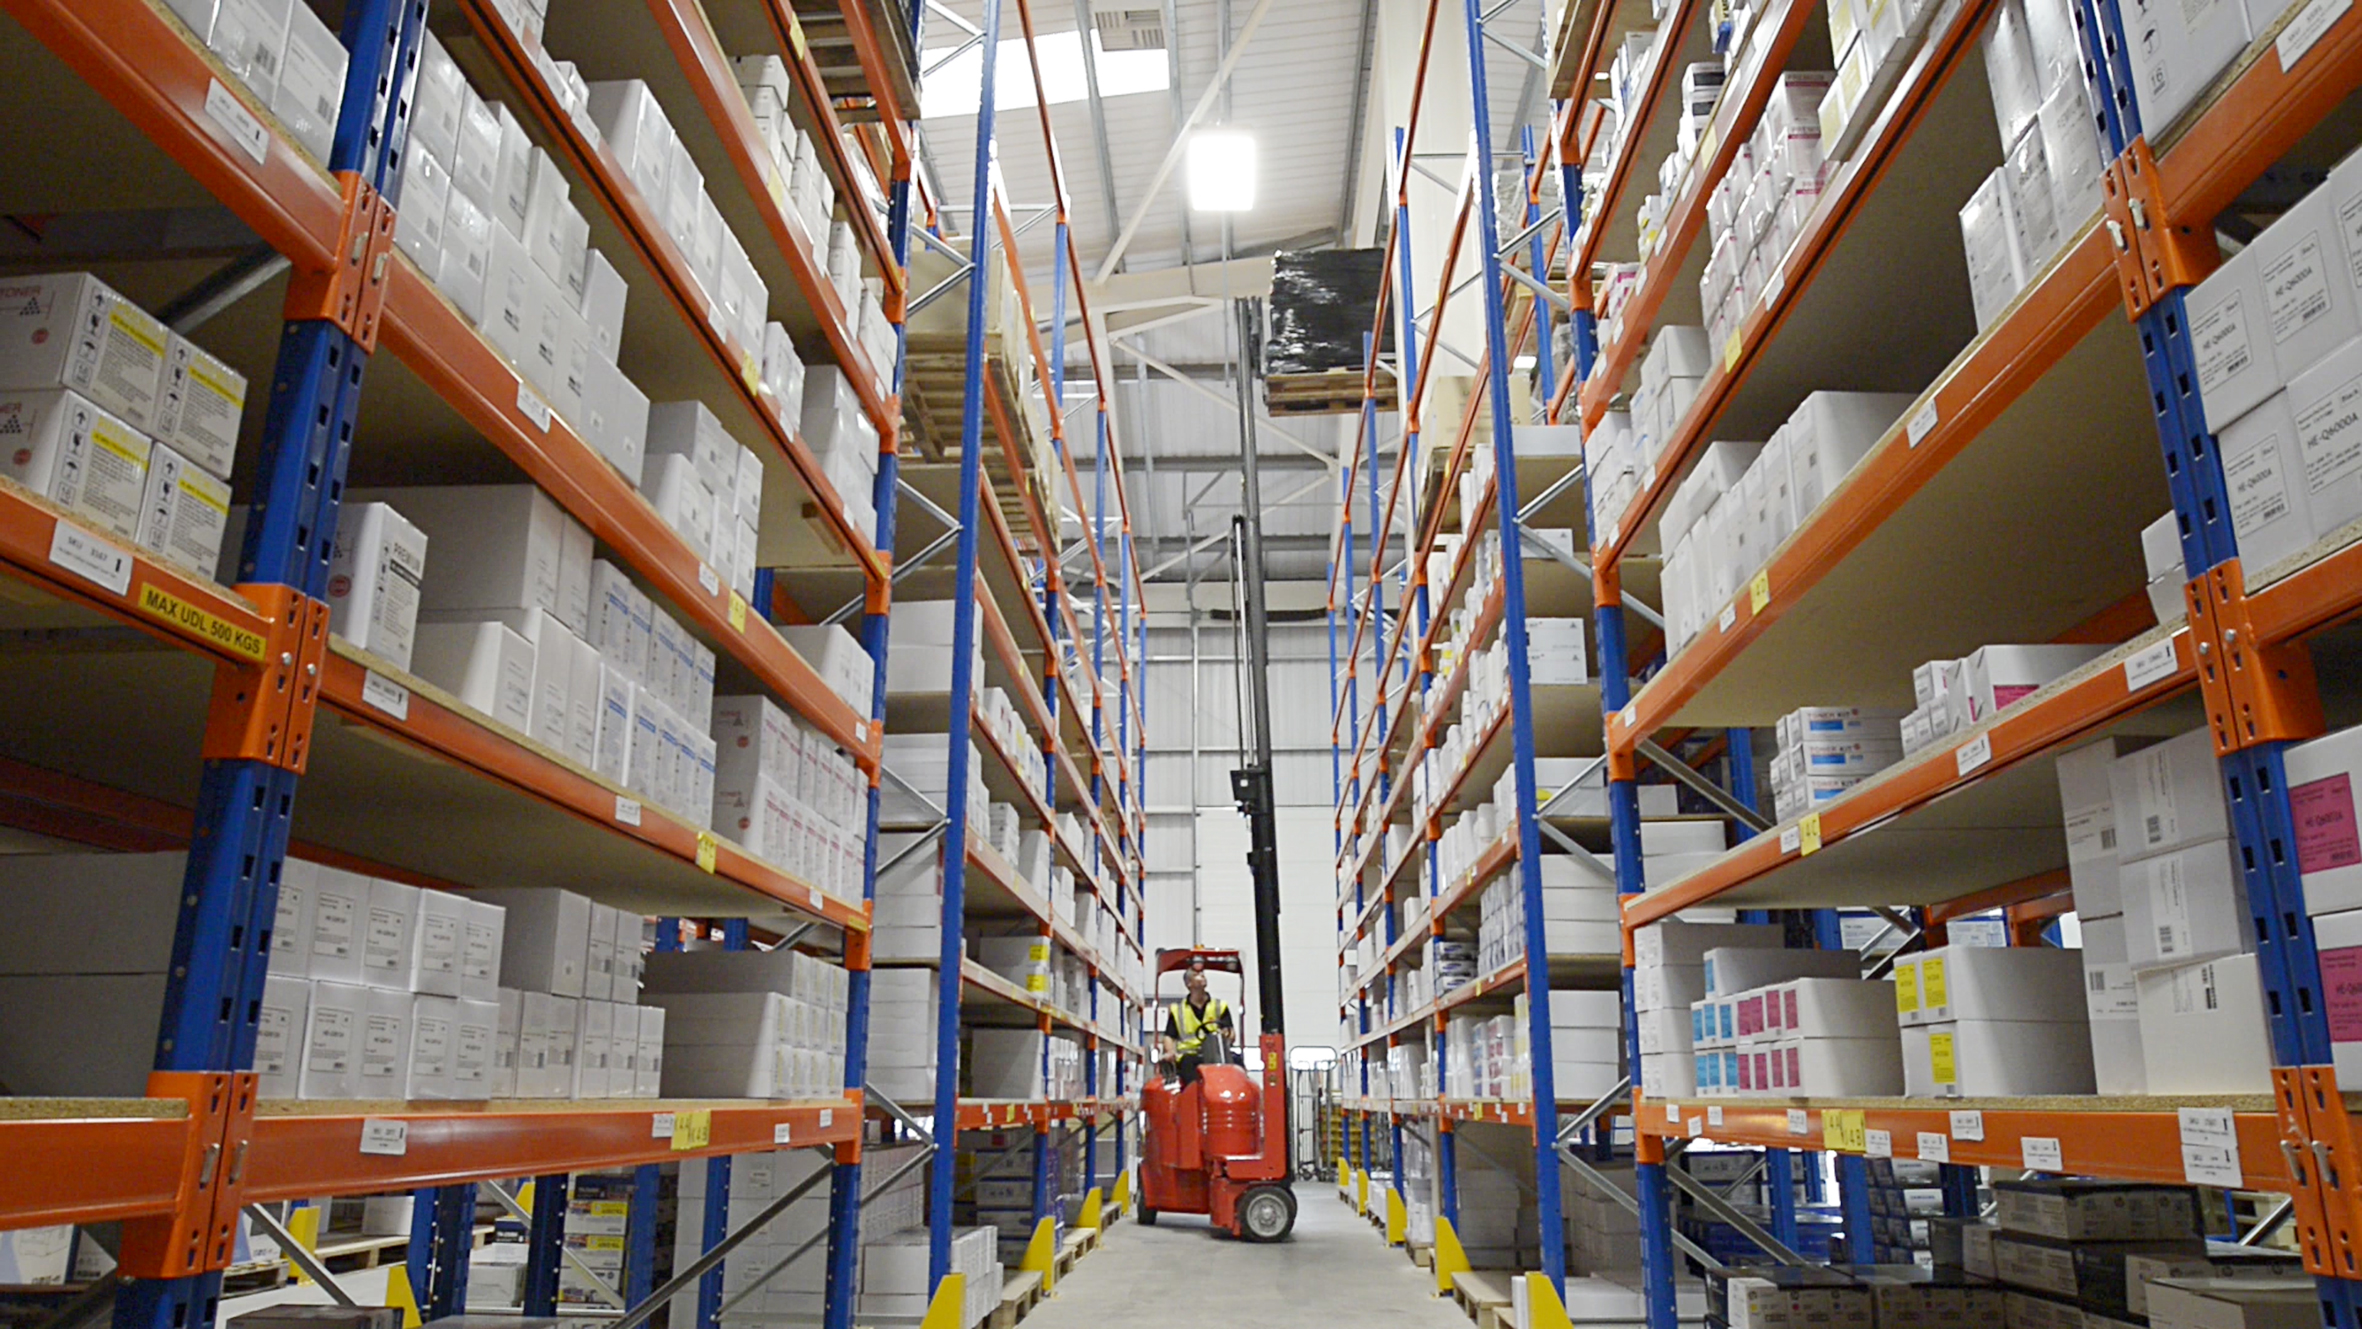 Switch to VNA doubles storage capacity for fulfilment specialist